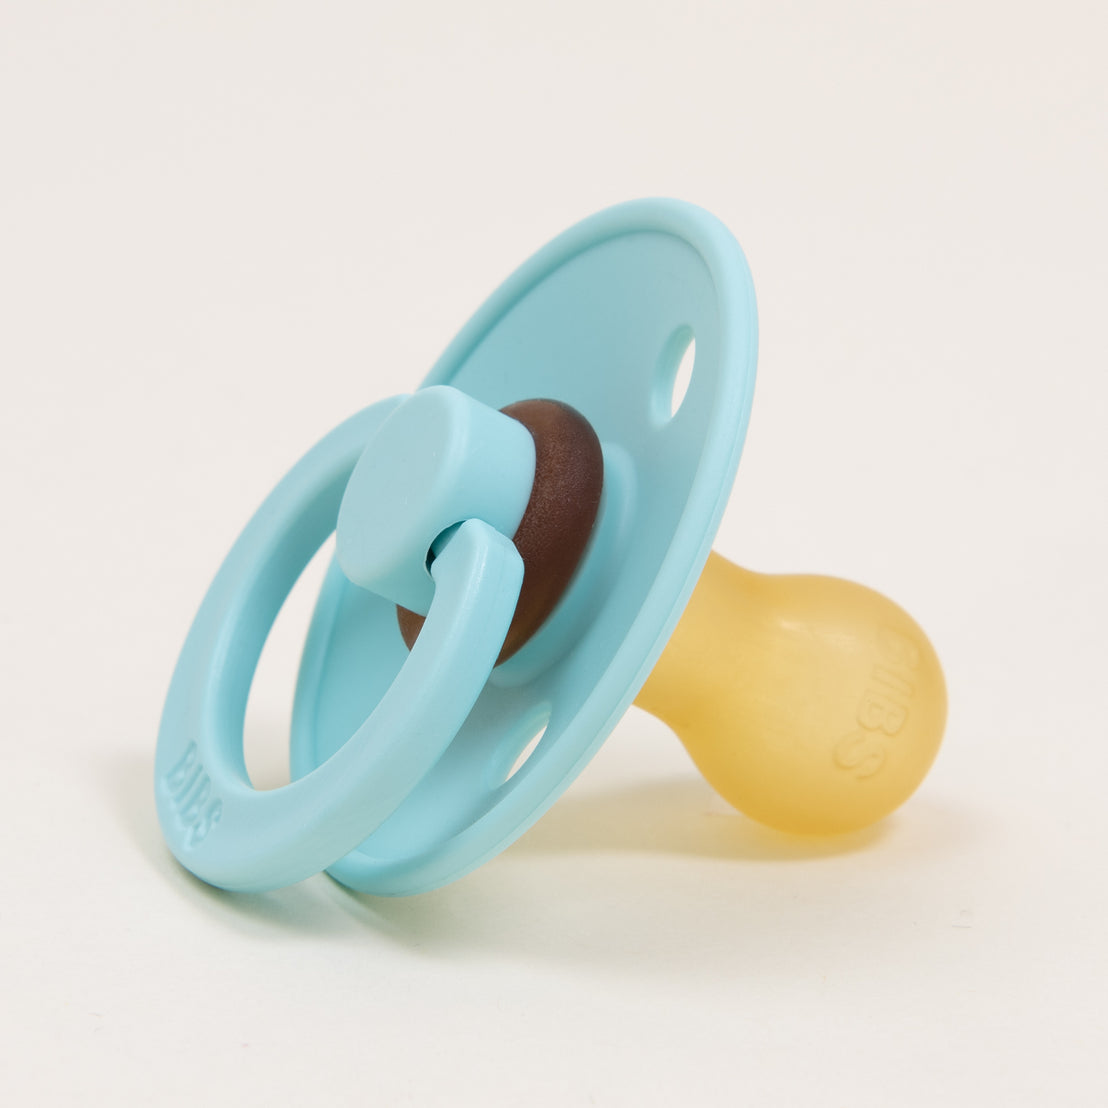 A mint Bibs pacifier with a yellow nipple, designed in Denmark, resting on a white background. The handle has the word "Bibs" embossed on it.